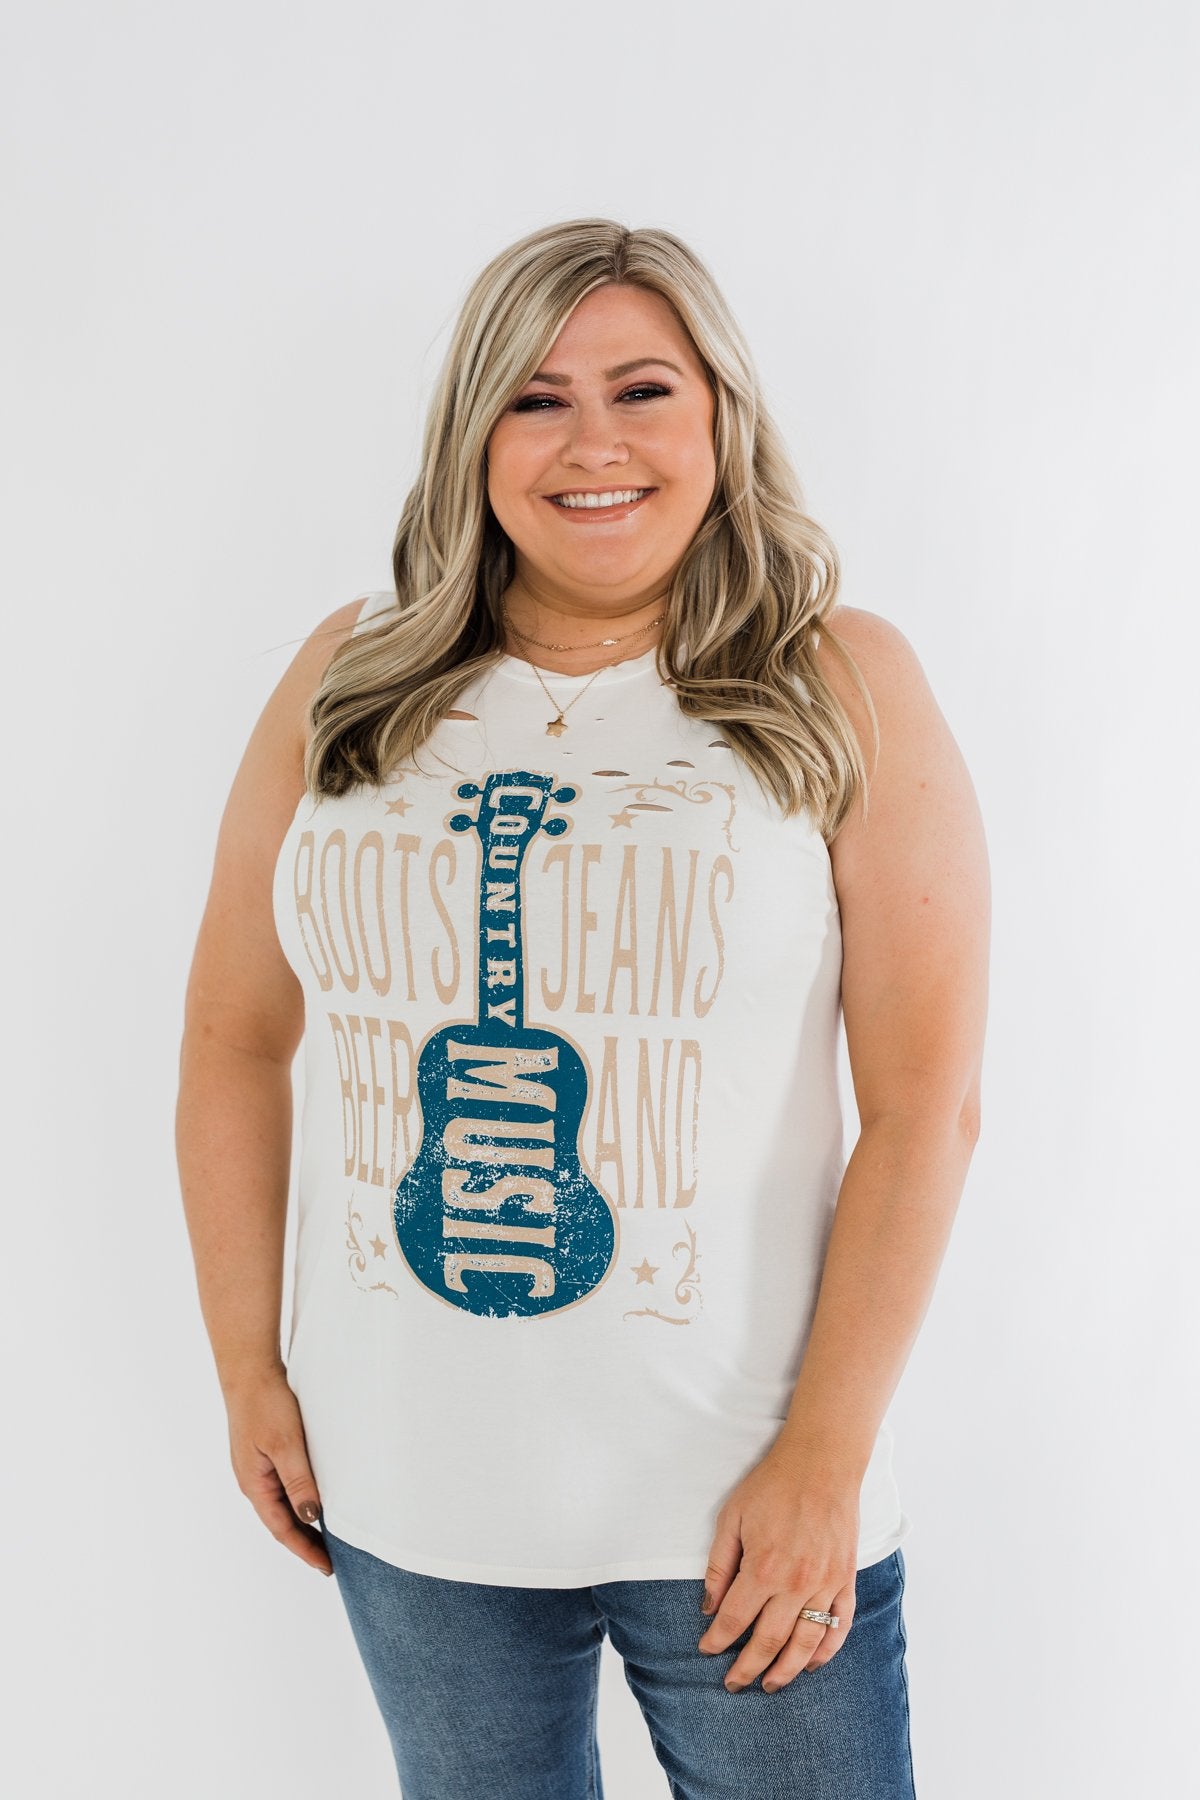 "Boots, Jeans, Beer, & Country Music" Graphic Tank Top- Ivory